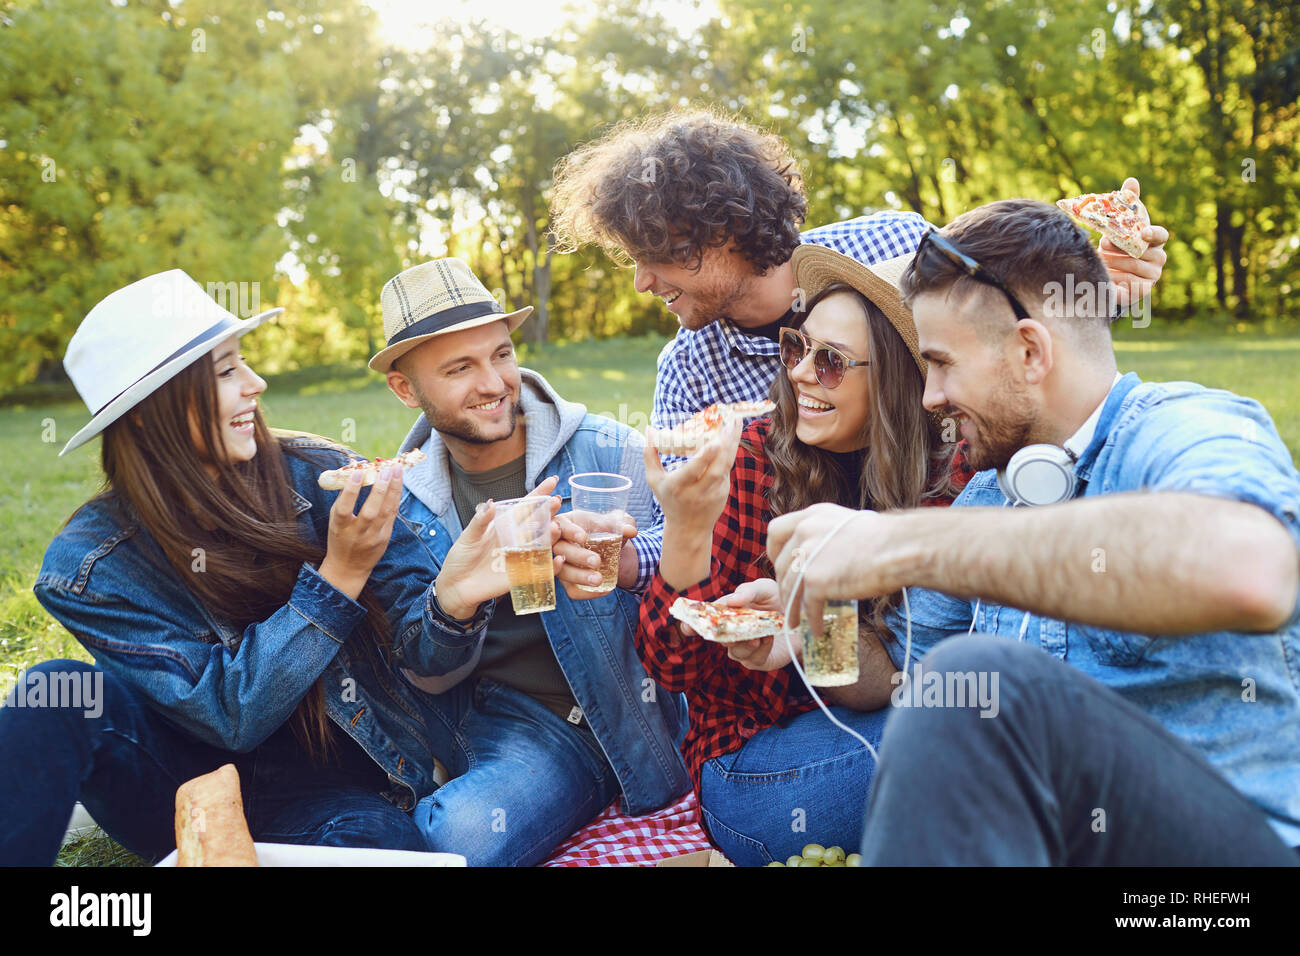 A group of young people having on a picnic in the park. Stock Photo